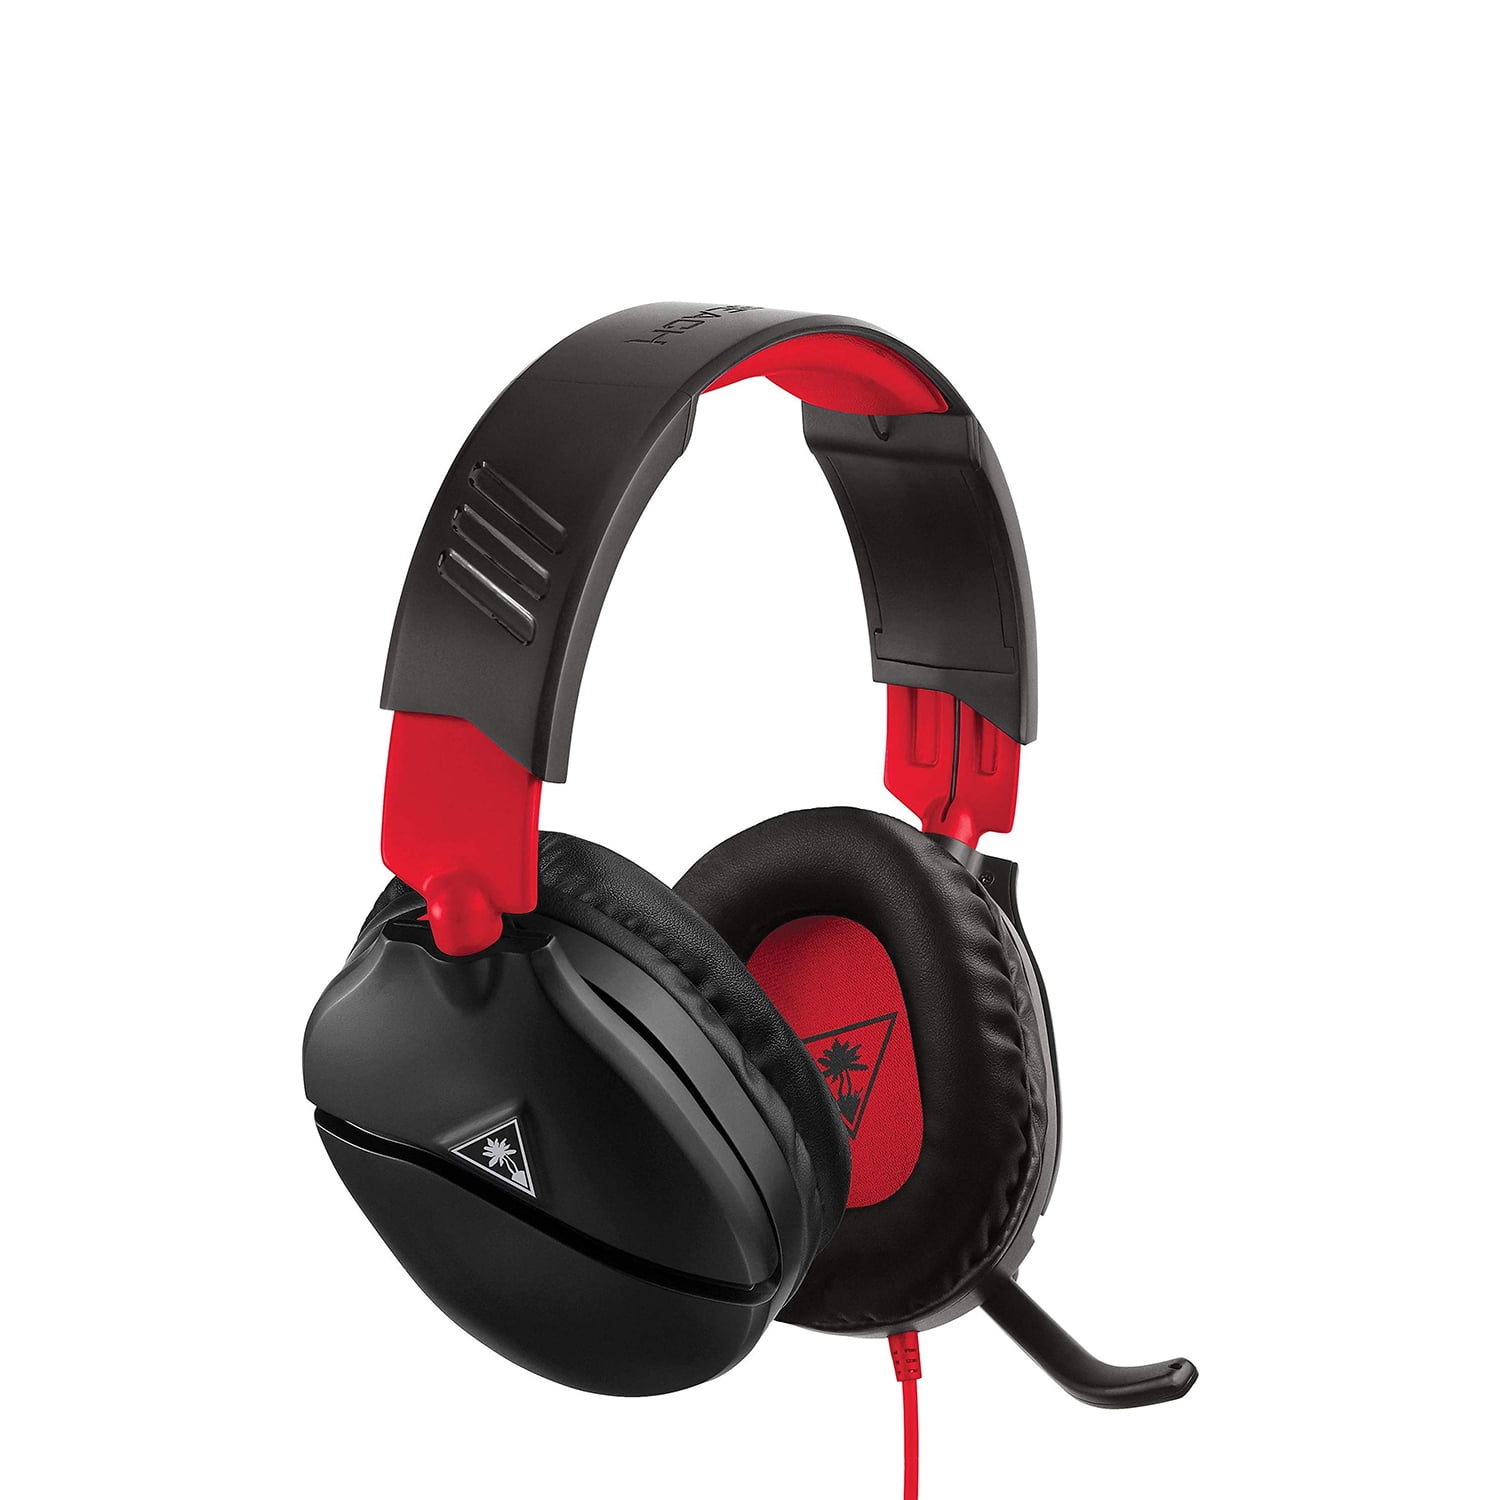 Recon 70 Wired Stereo Gaming Headset 